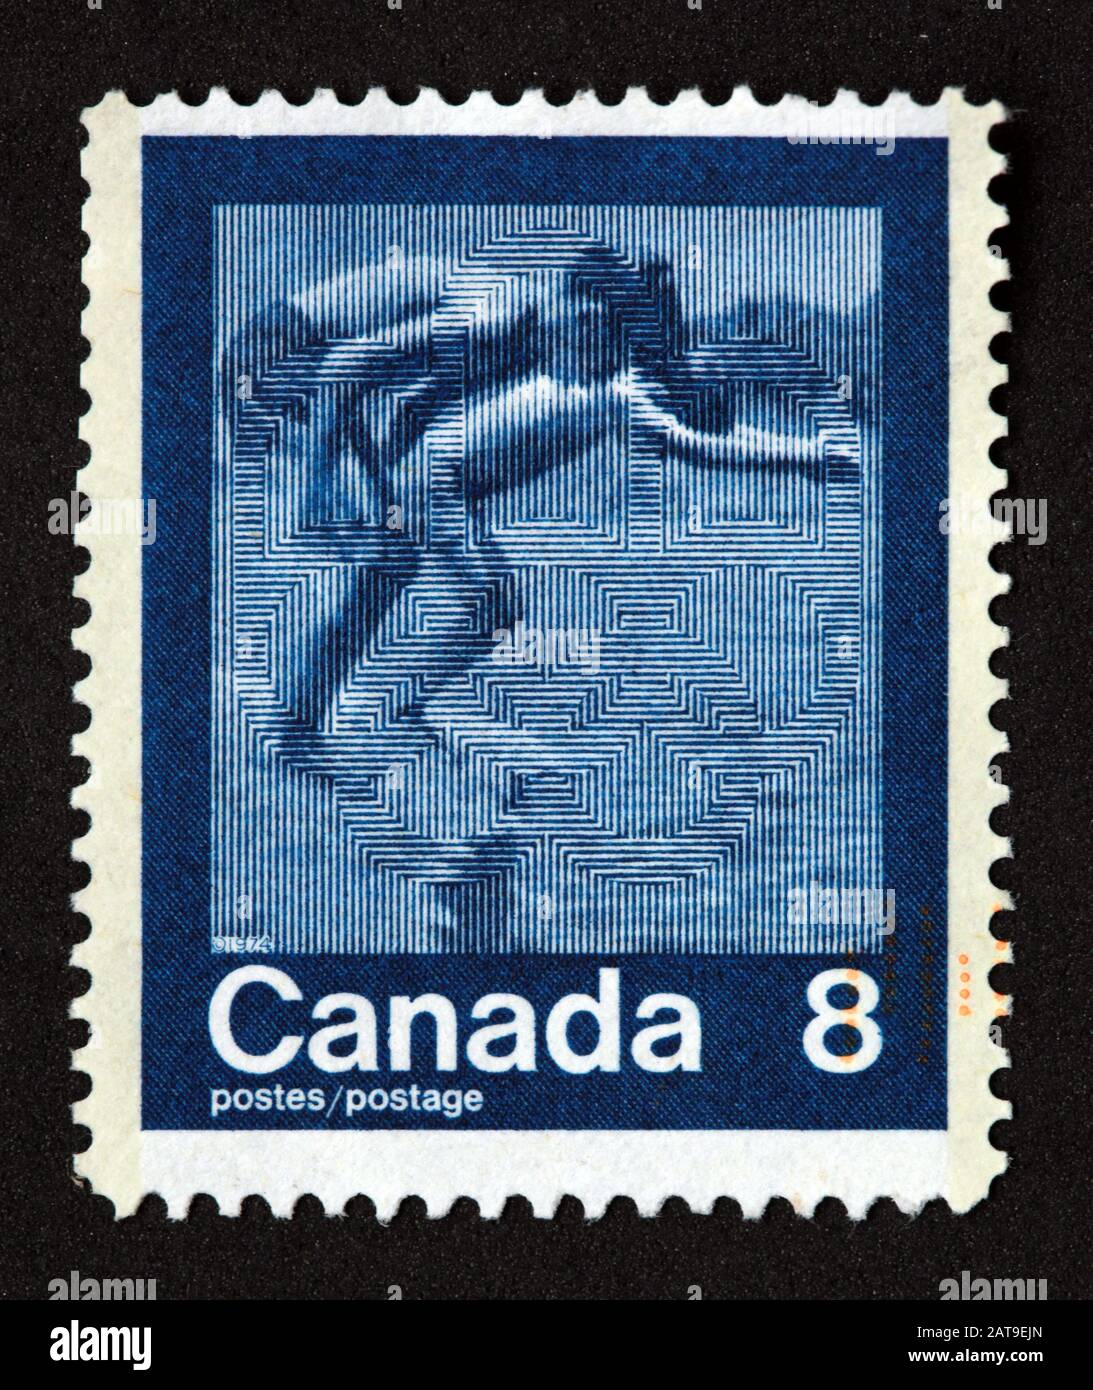 Canadian Stamp, Canada Stamp, Canada Post,used stamp, Canada 8c,8cent, 1974,postes,postage, blue swimmer Stock Photo